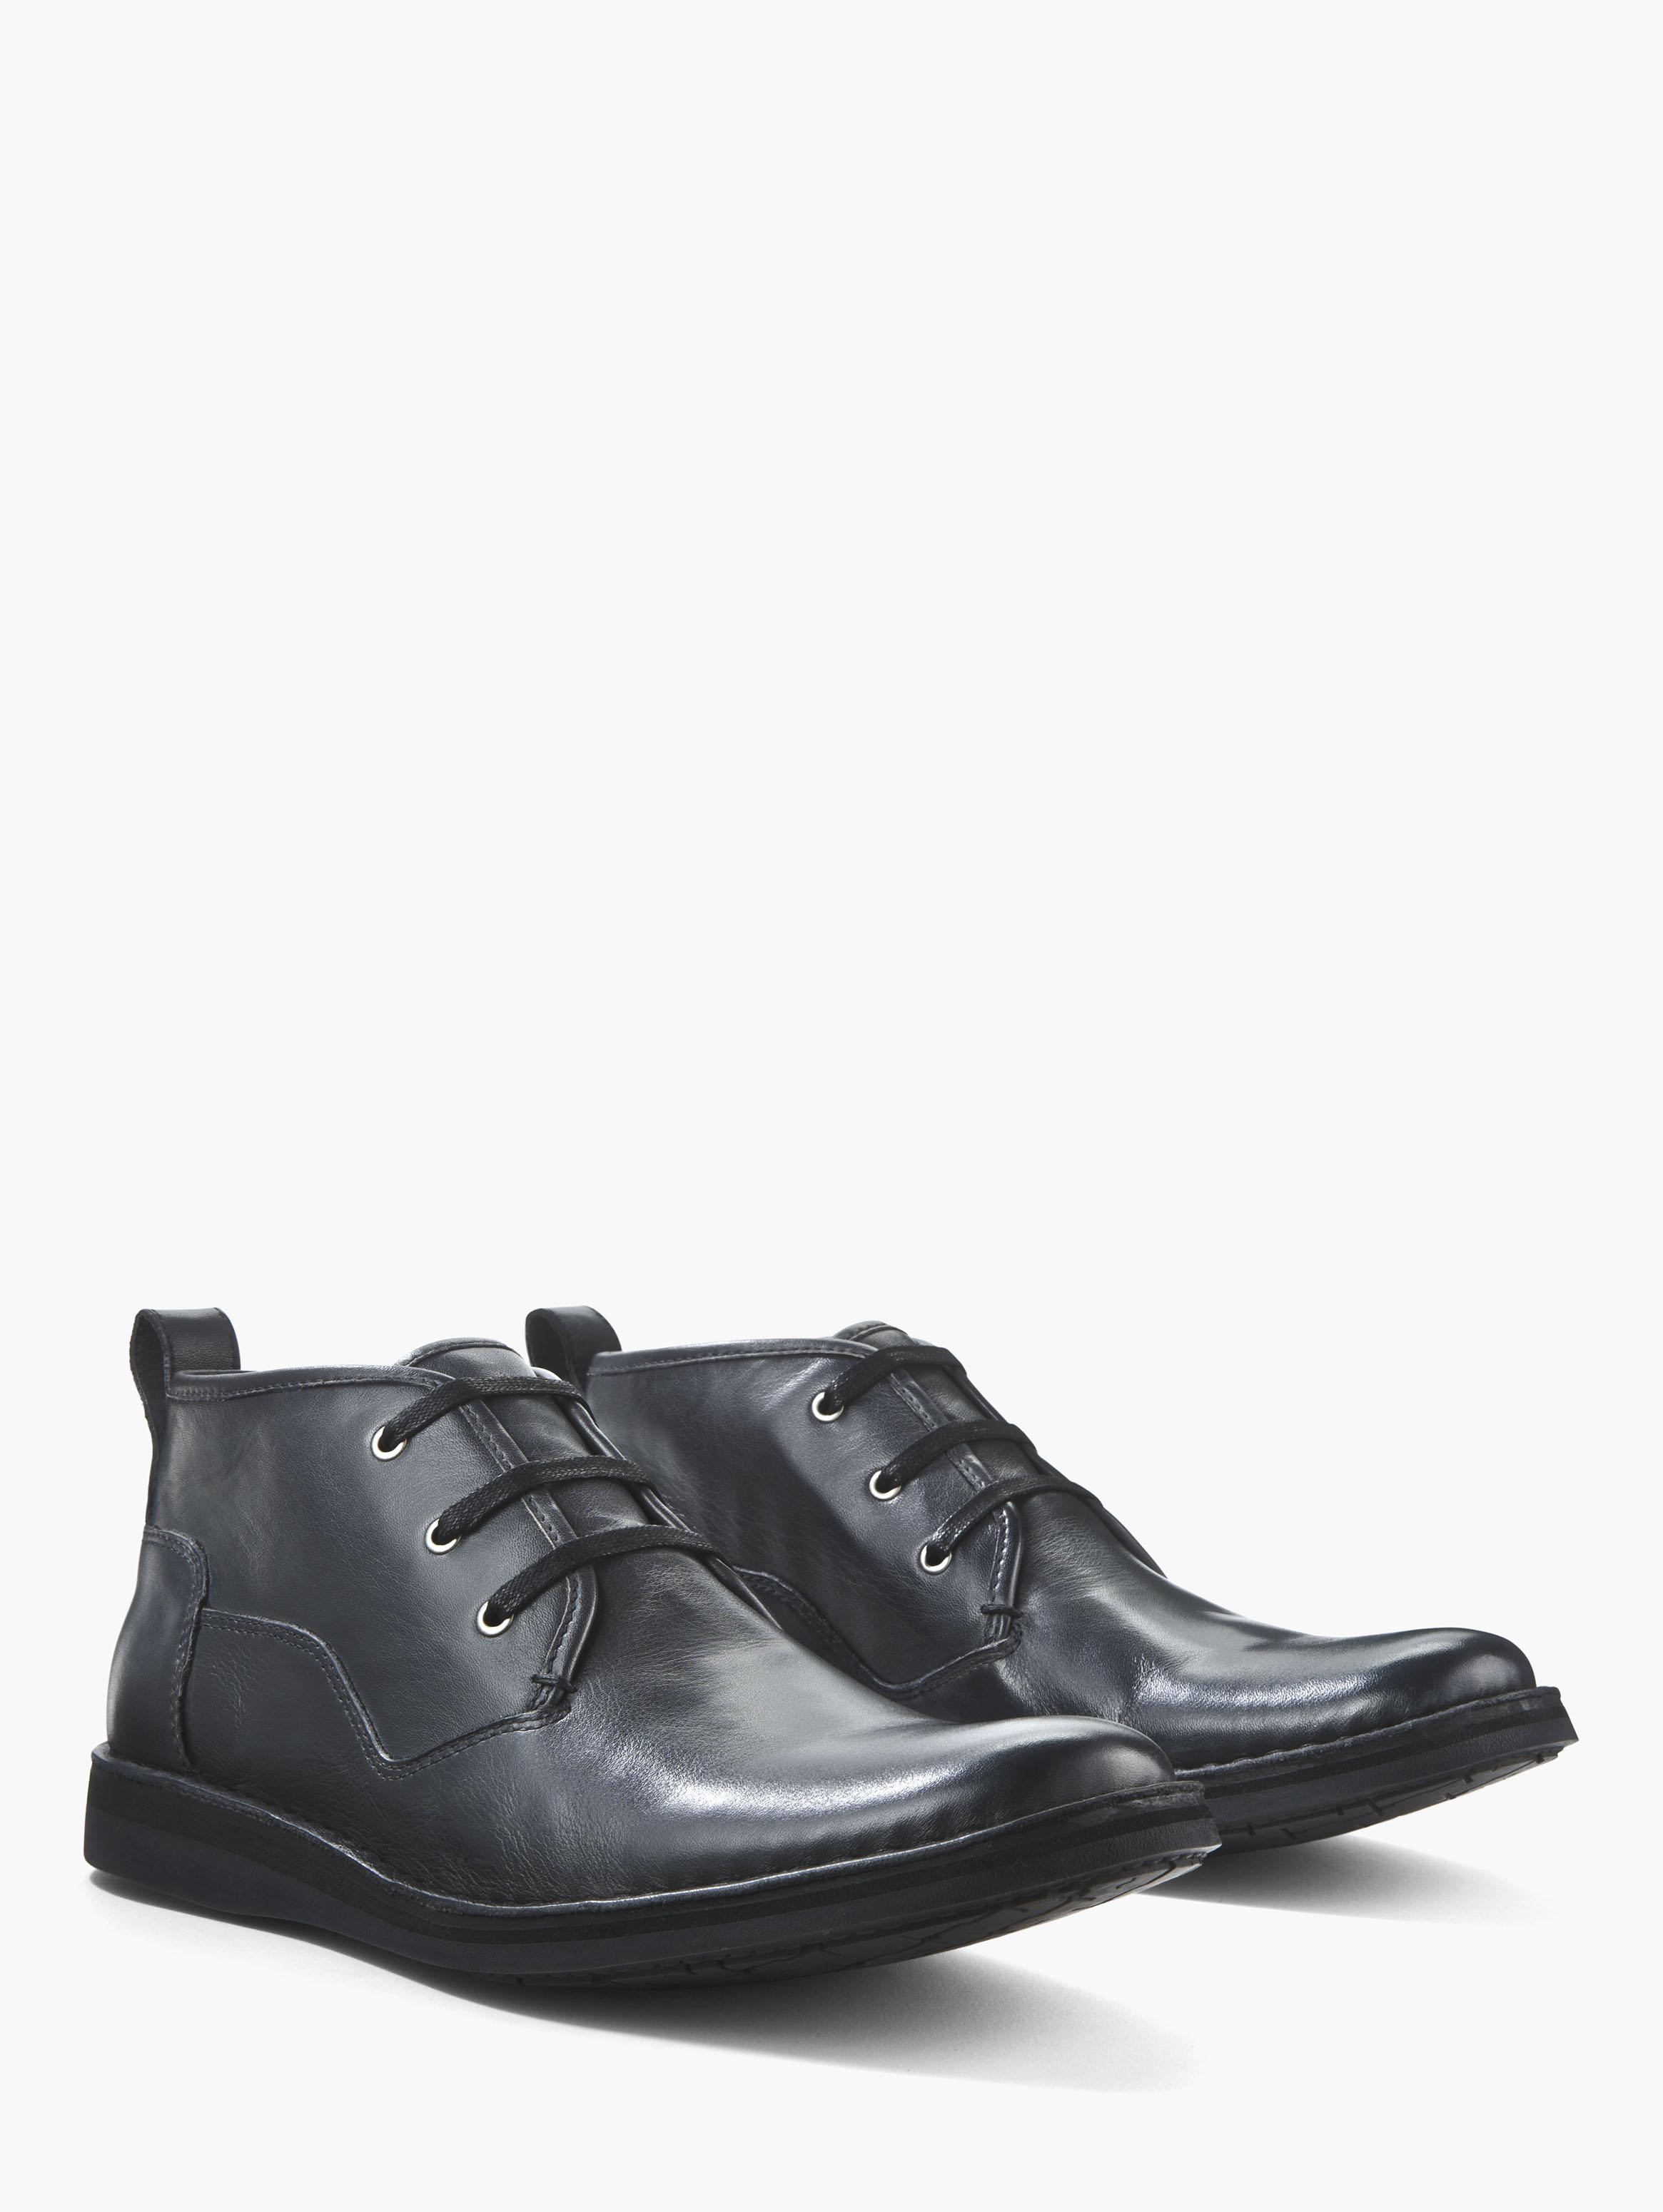 John Varvatos Men's Shoes and Sneakers at MenStyle USA